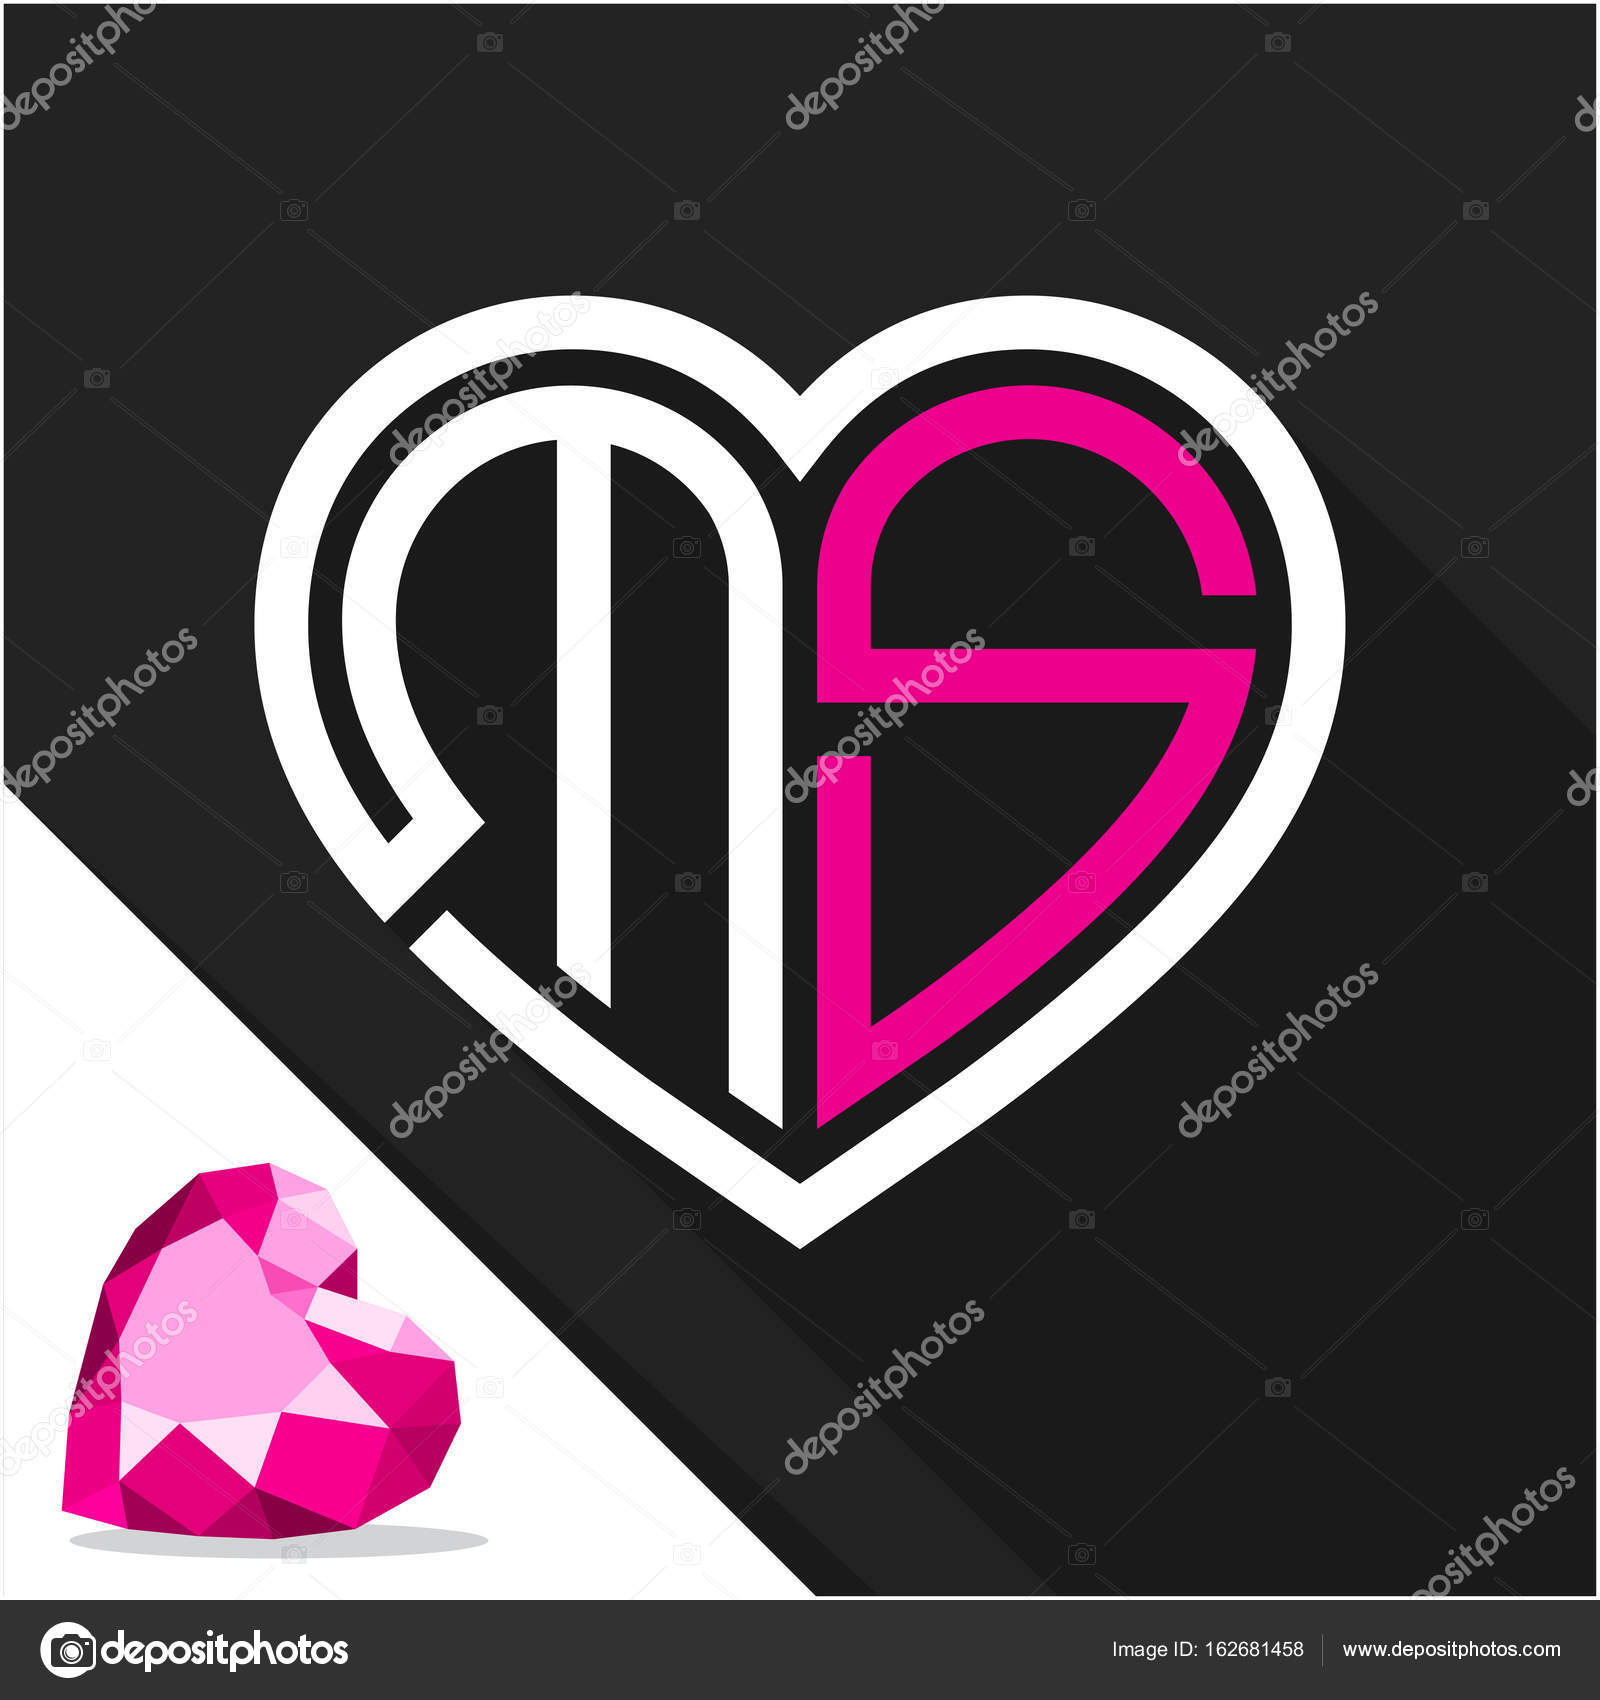 Icon logo heart shape with combination of initials letter M & S ...